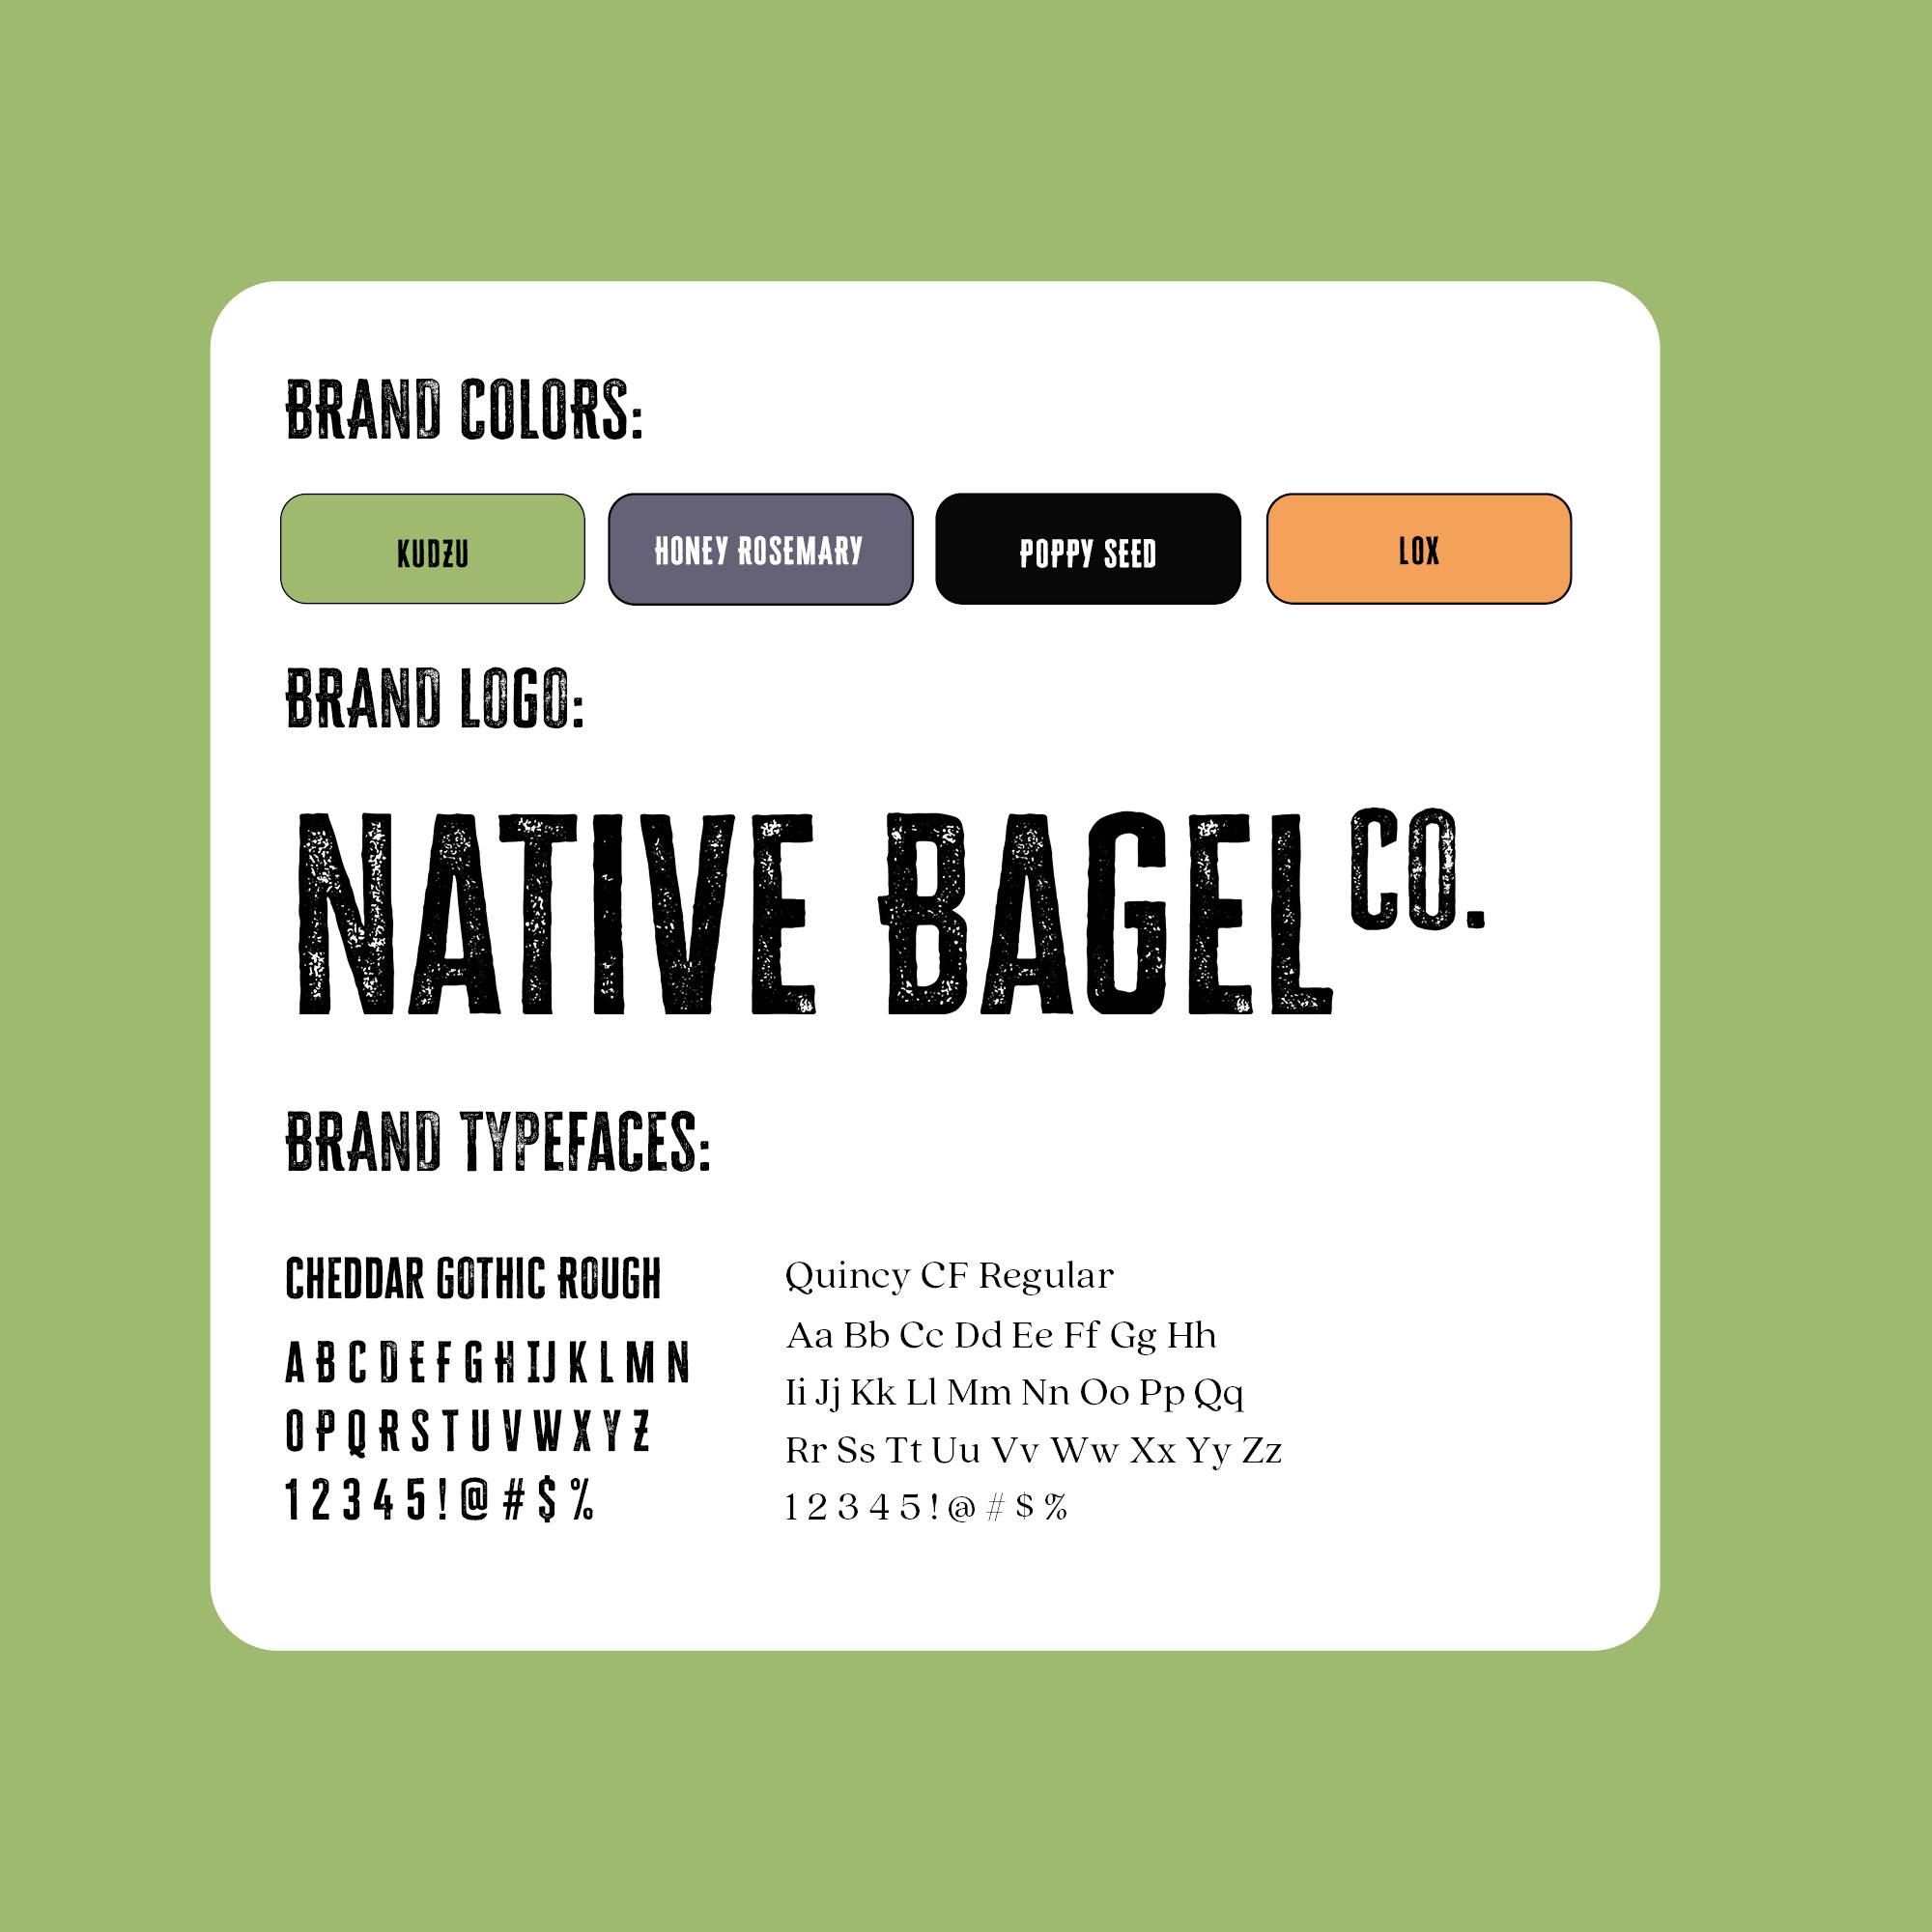 Brand assets alongside a text box that reads: Native Bagel Co. is a locally owned cafe within Berea, KY that serves bagels, espresso drinks and coffee, and lunch items. With humble beginnings as a bagel vendor at Berea’s farmer’s market, the company became a small-town favorite. Native Bagel was officially opened in 2016 by Katie Startzman who had a desire to spread her love of cafe food and give the Berea community more food options. Ingredients are locally sourced from Berea College’s farm and coffee beans are sourced from local Kentucky roasters Sunergos’ in Louisville. Native Bagel Co. community focused and is centered on providing a space for the community to eat, relax, study, work, and collaborate. Nightjar has become the nighttime parent company of Native Bagel Co. Opening at 5pm, more locally sourced food is served as well as draft beer and cocktails at Nightjar.